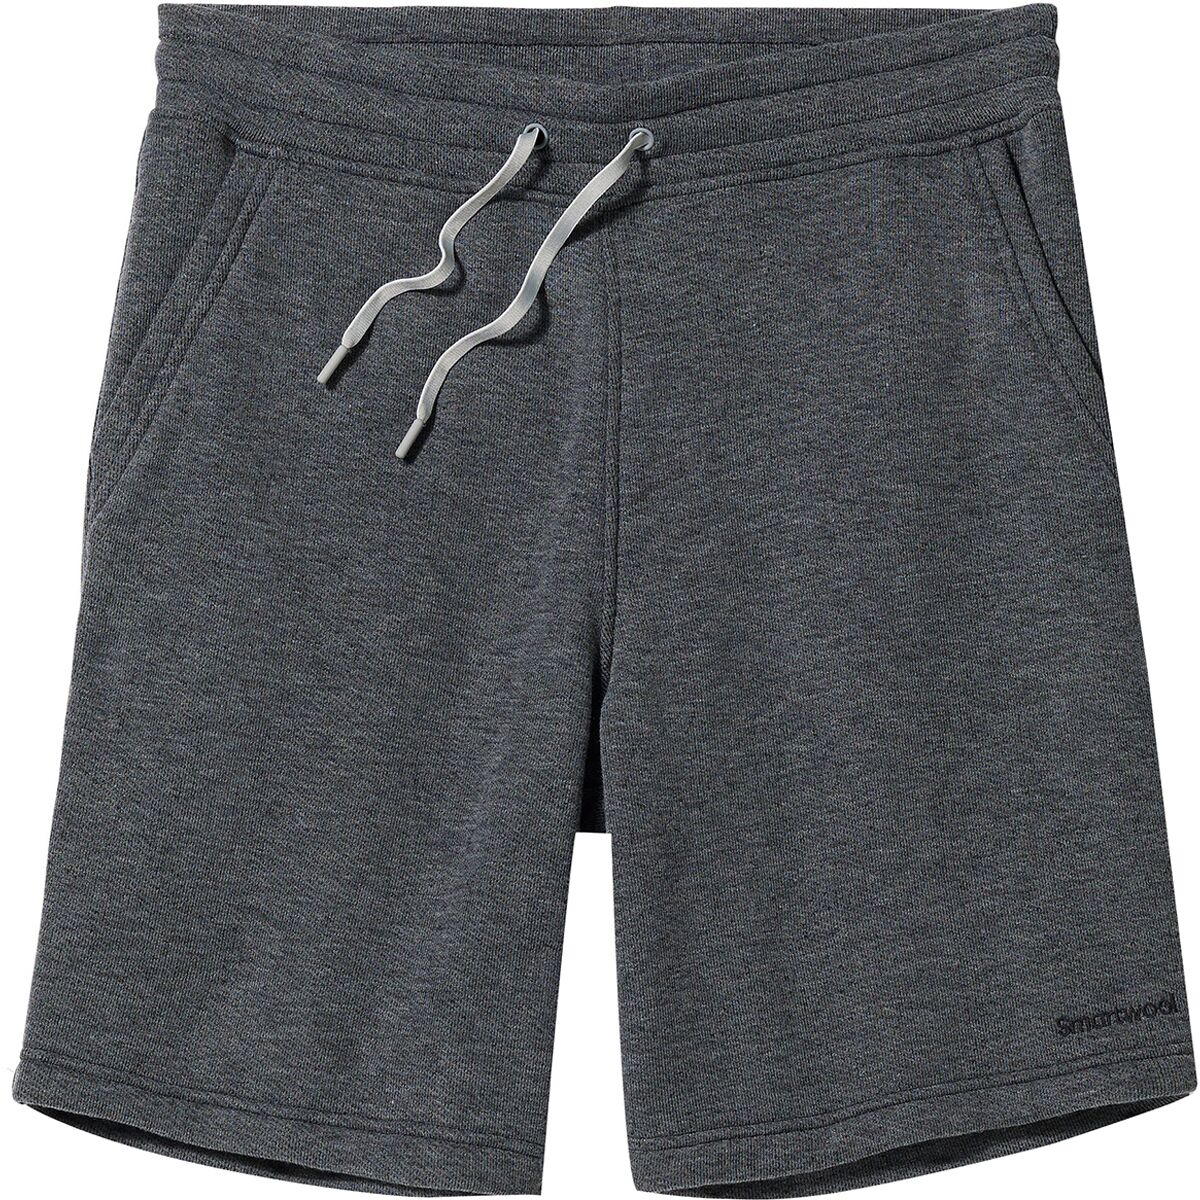 Smartwool Recycled Terry Short